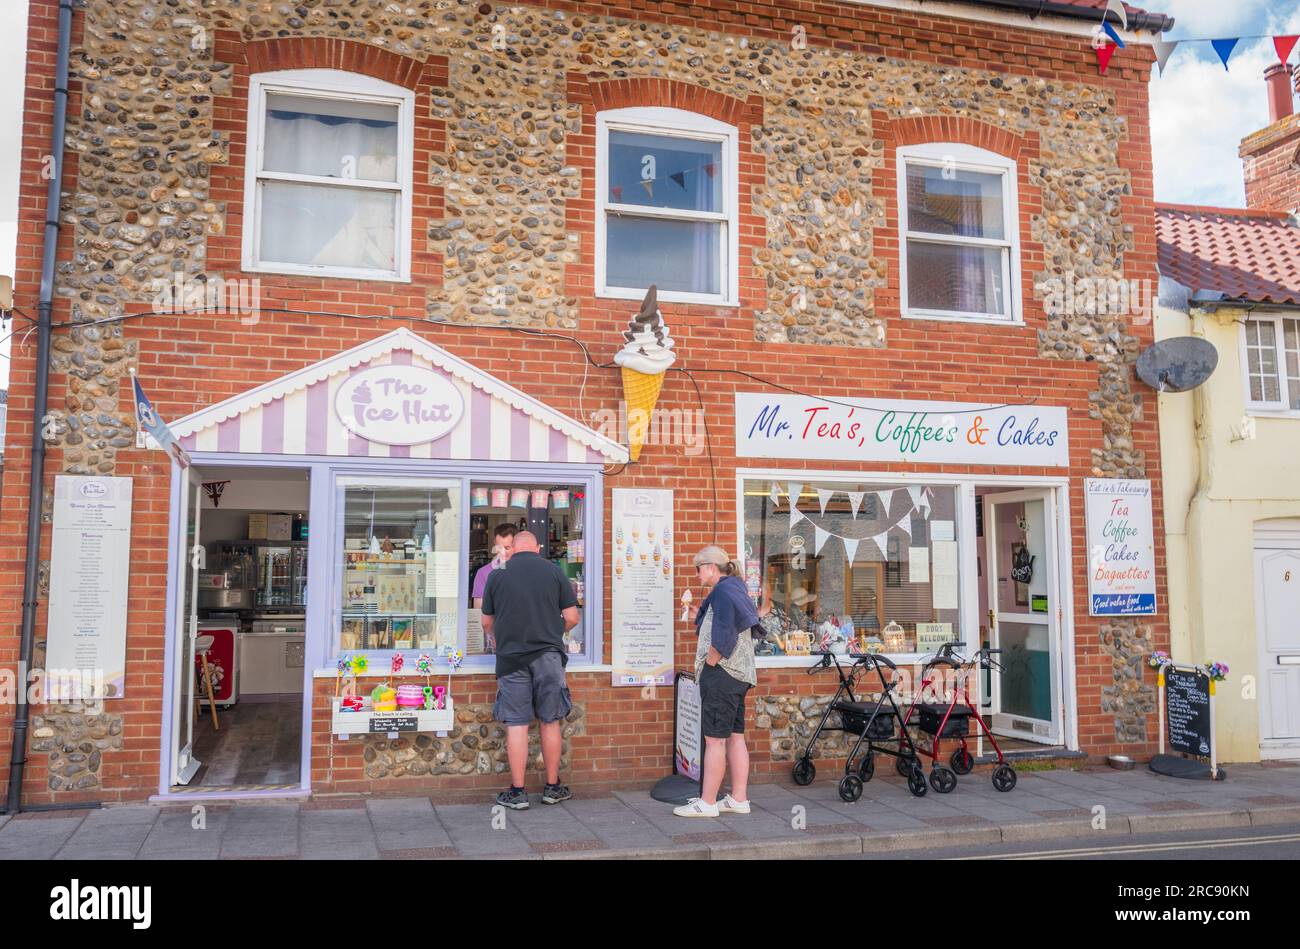 Customers at the Mr Tea's, Coffee's and Cake shop and The Ice Hut on the high street in Sheringham, Norfolh, England. Stock Photo